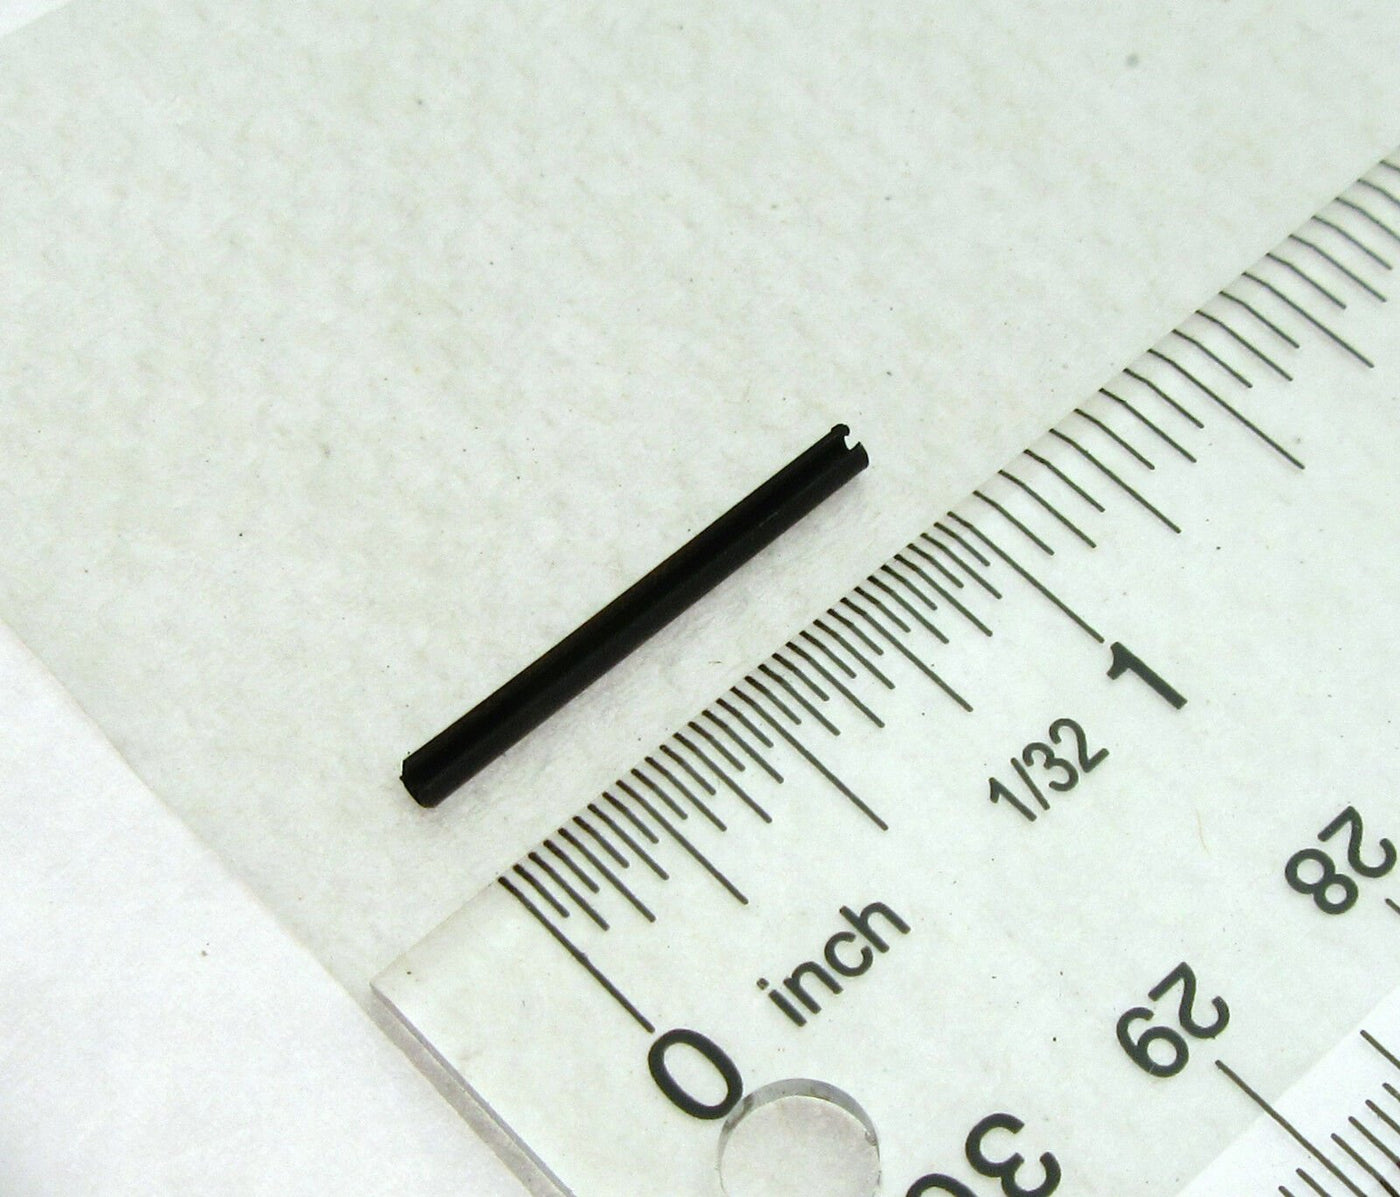 Spring Pin ( Roll Pin ) ~ 5/64 inch X 1" length ~ Heat Treated Spring Steel